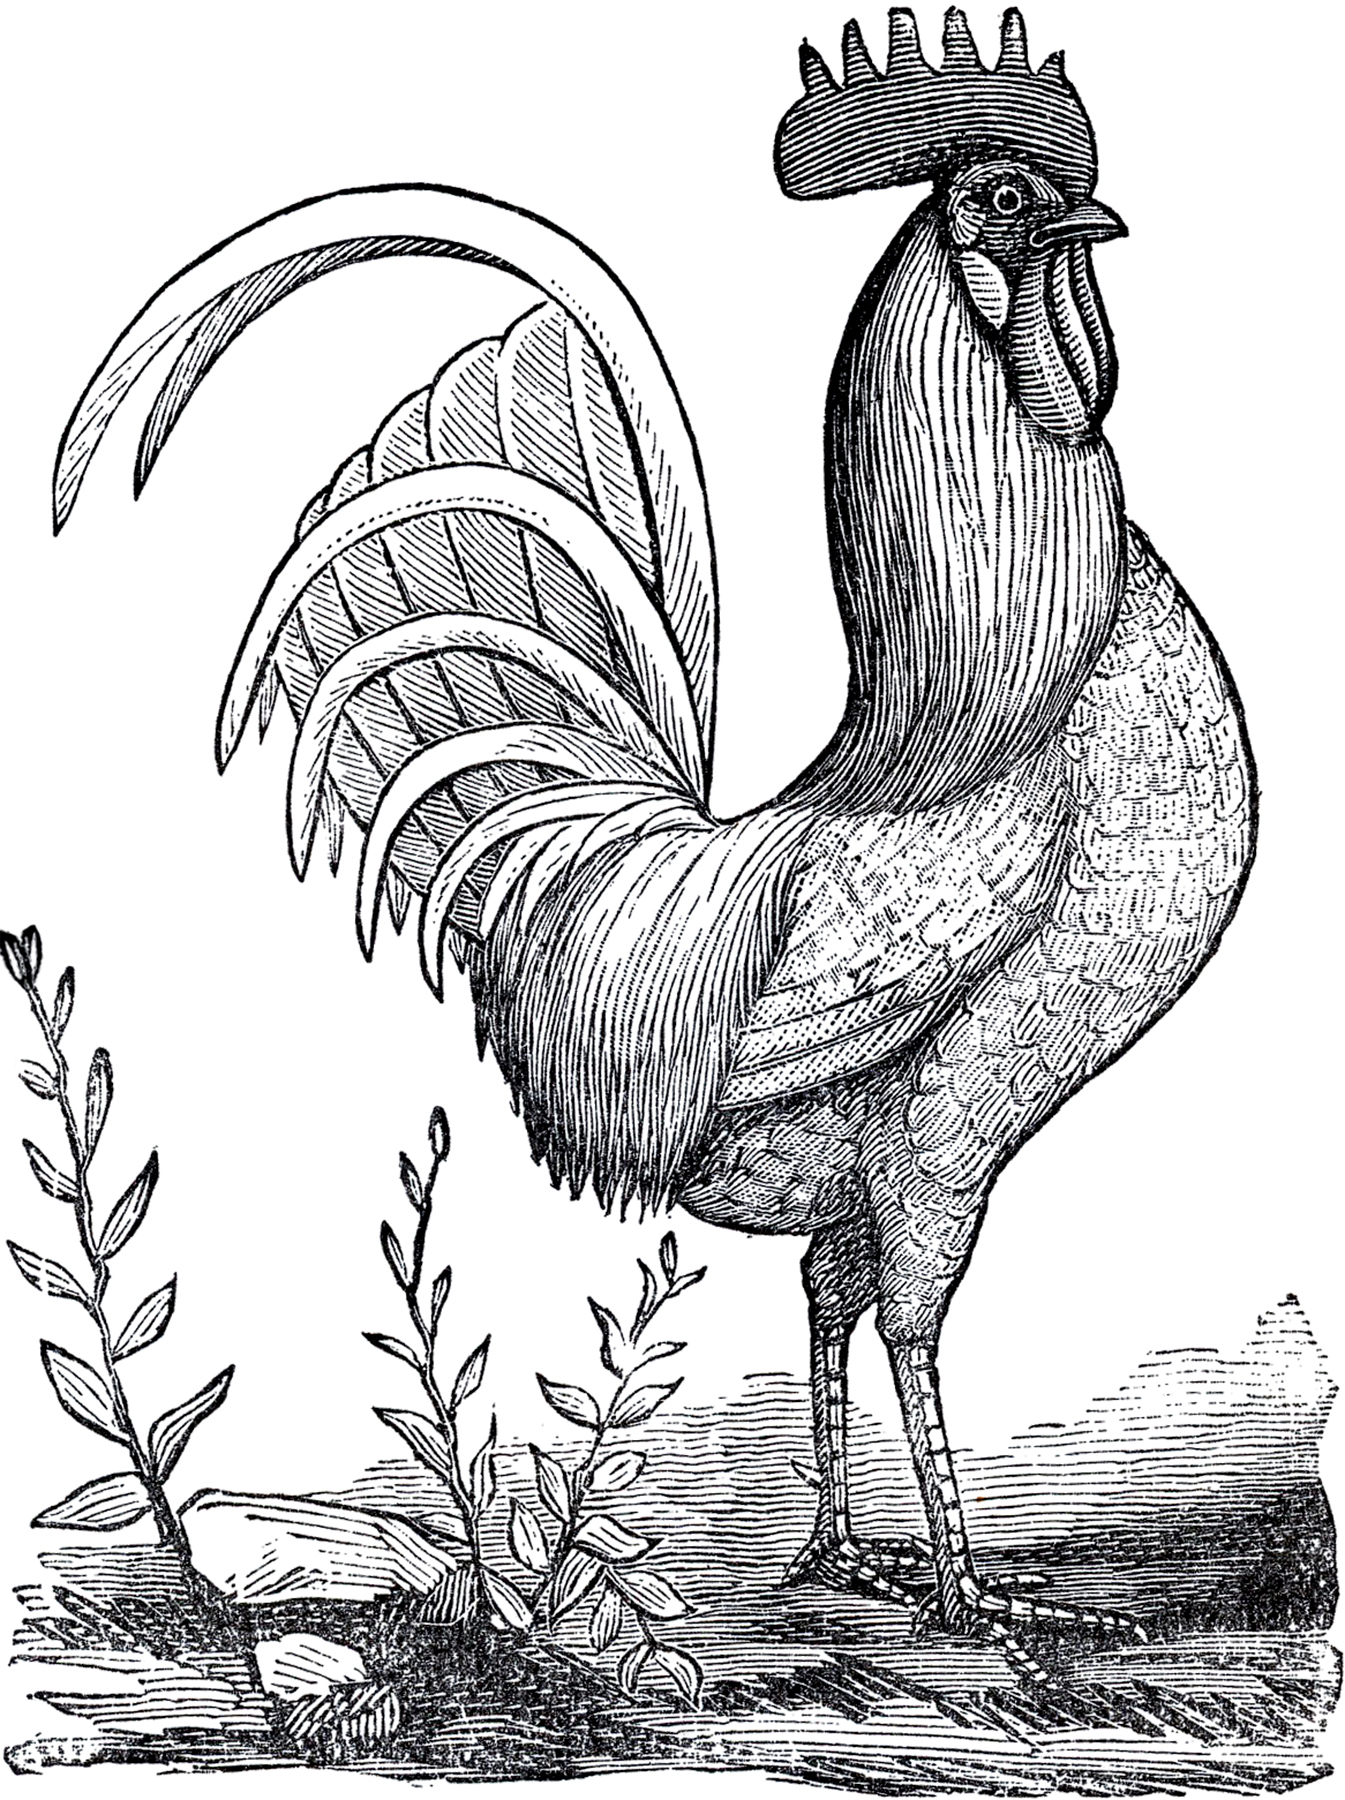 Public Domain Rooster Image